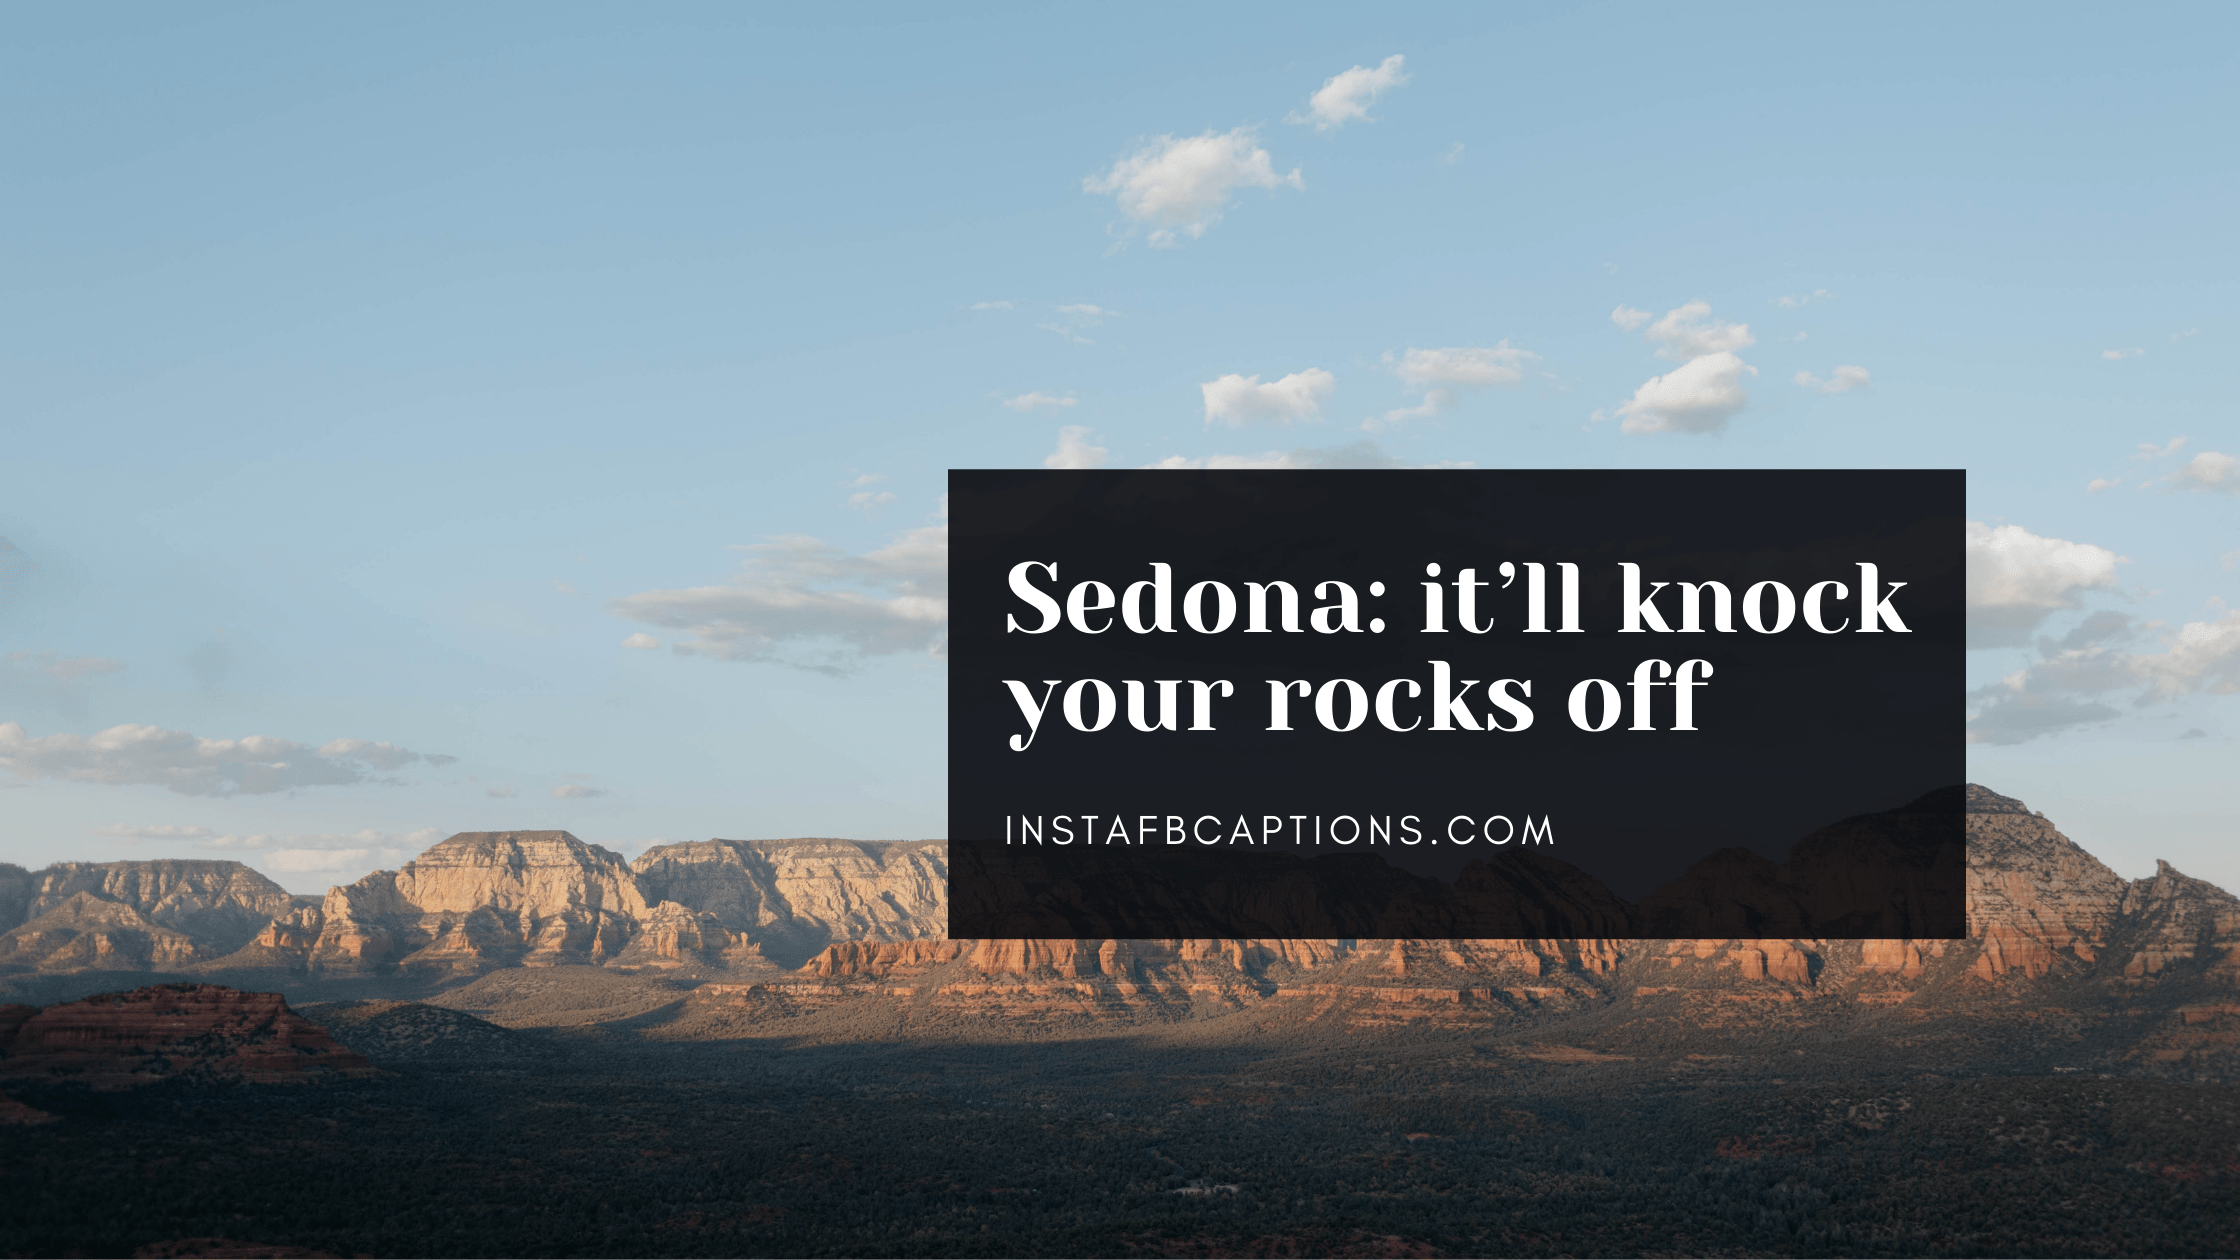 Amazing Sedona Puns  - Amazing Sedona Puns - 128 Sedona Instagram Captions for Vacation in 2022